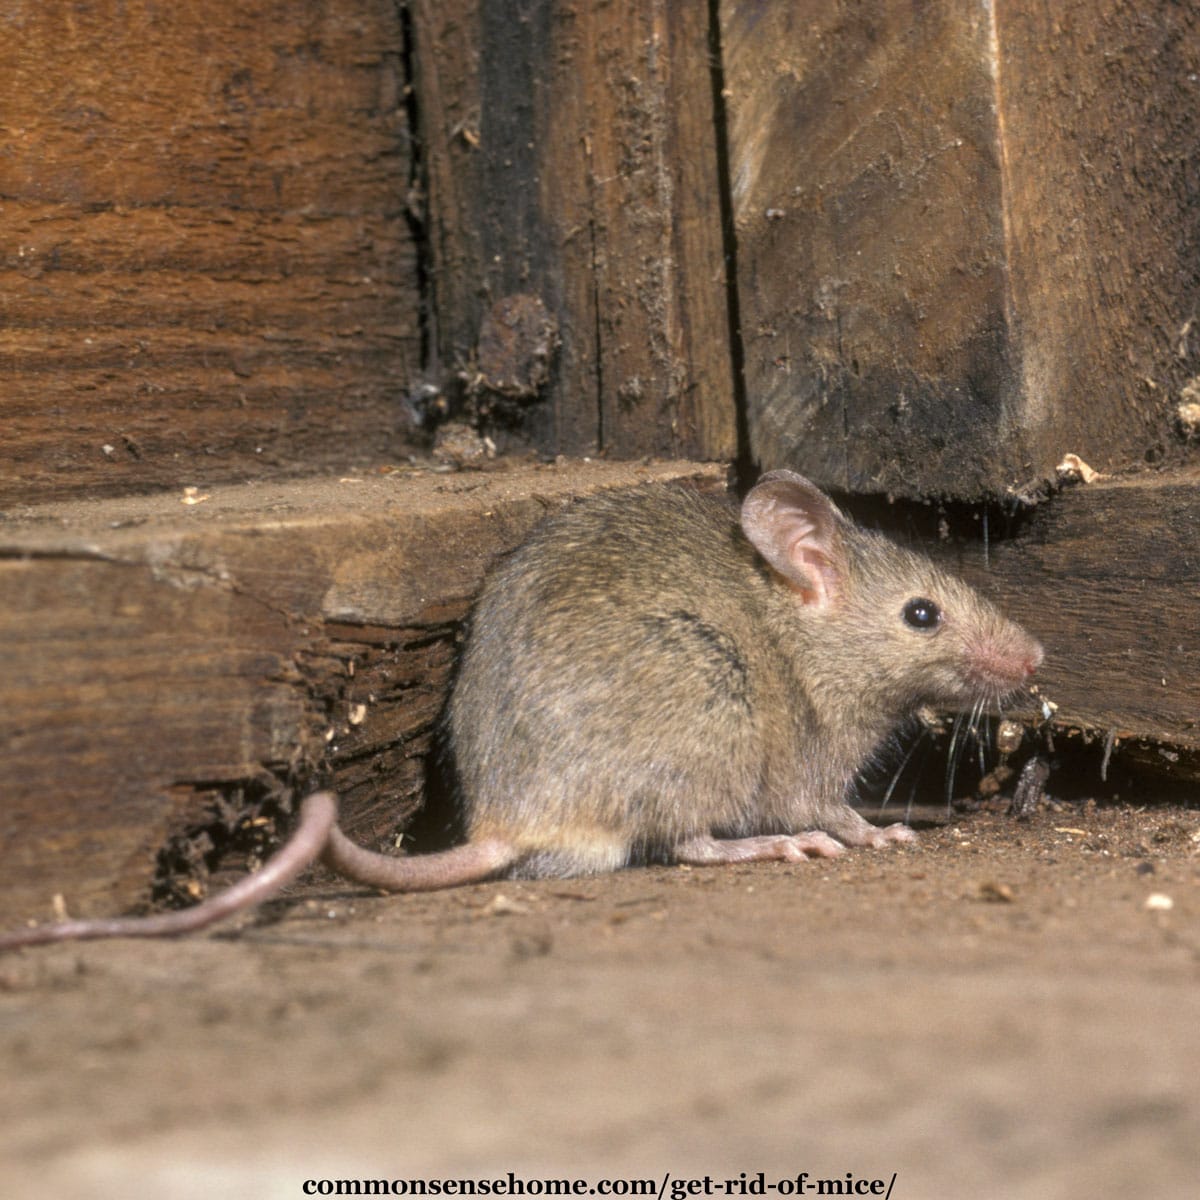 How to Get Rid of Mice in Your House and Garage pic